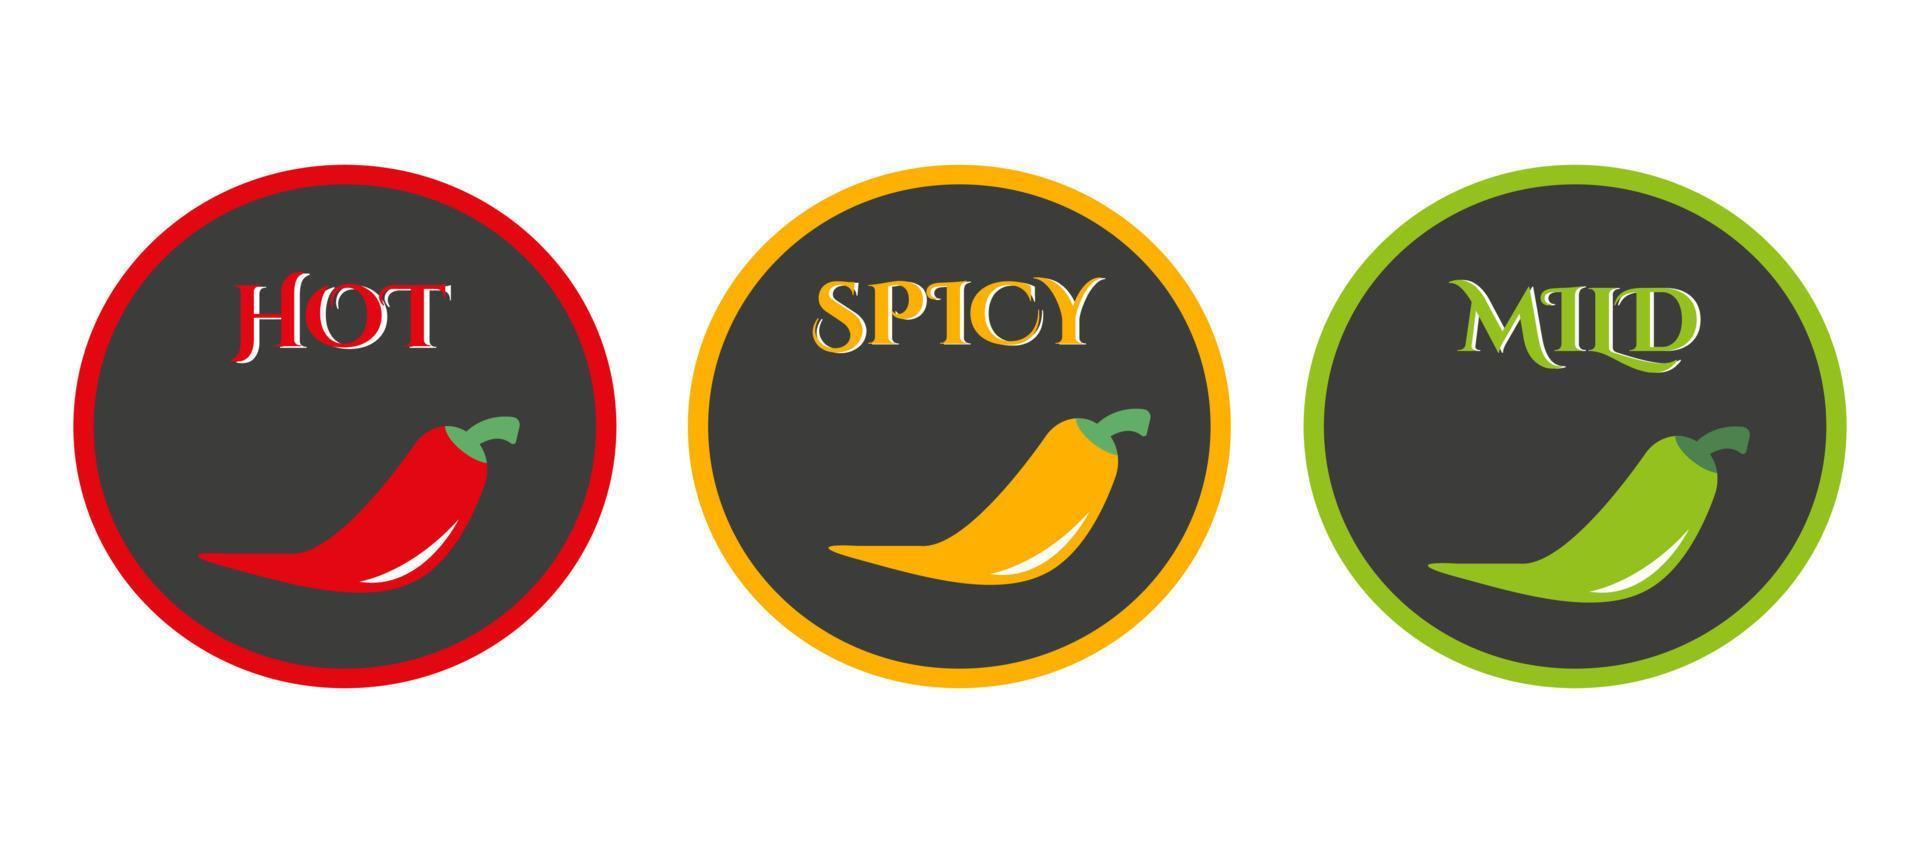 Labels of the level of hot pepper in food. Hot, spicy and mild icon with red, yellow and green chilli peppers. Vector illustration